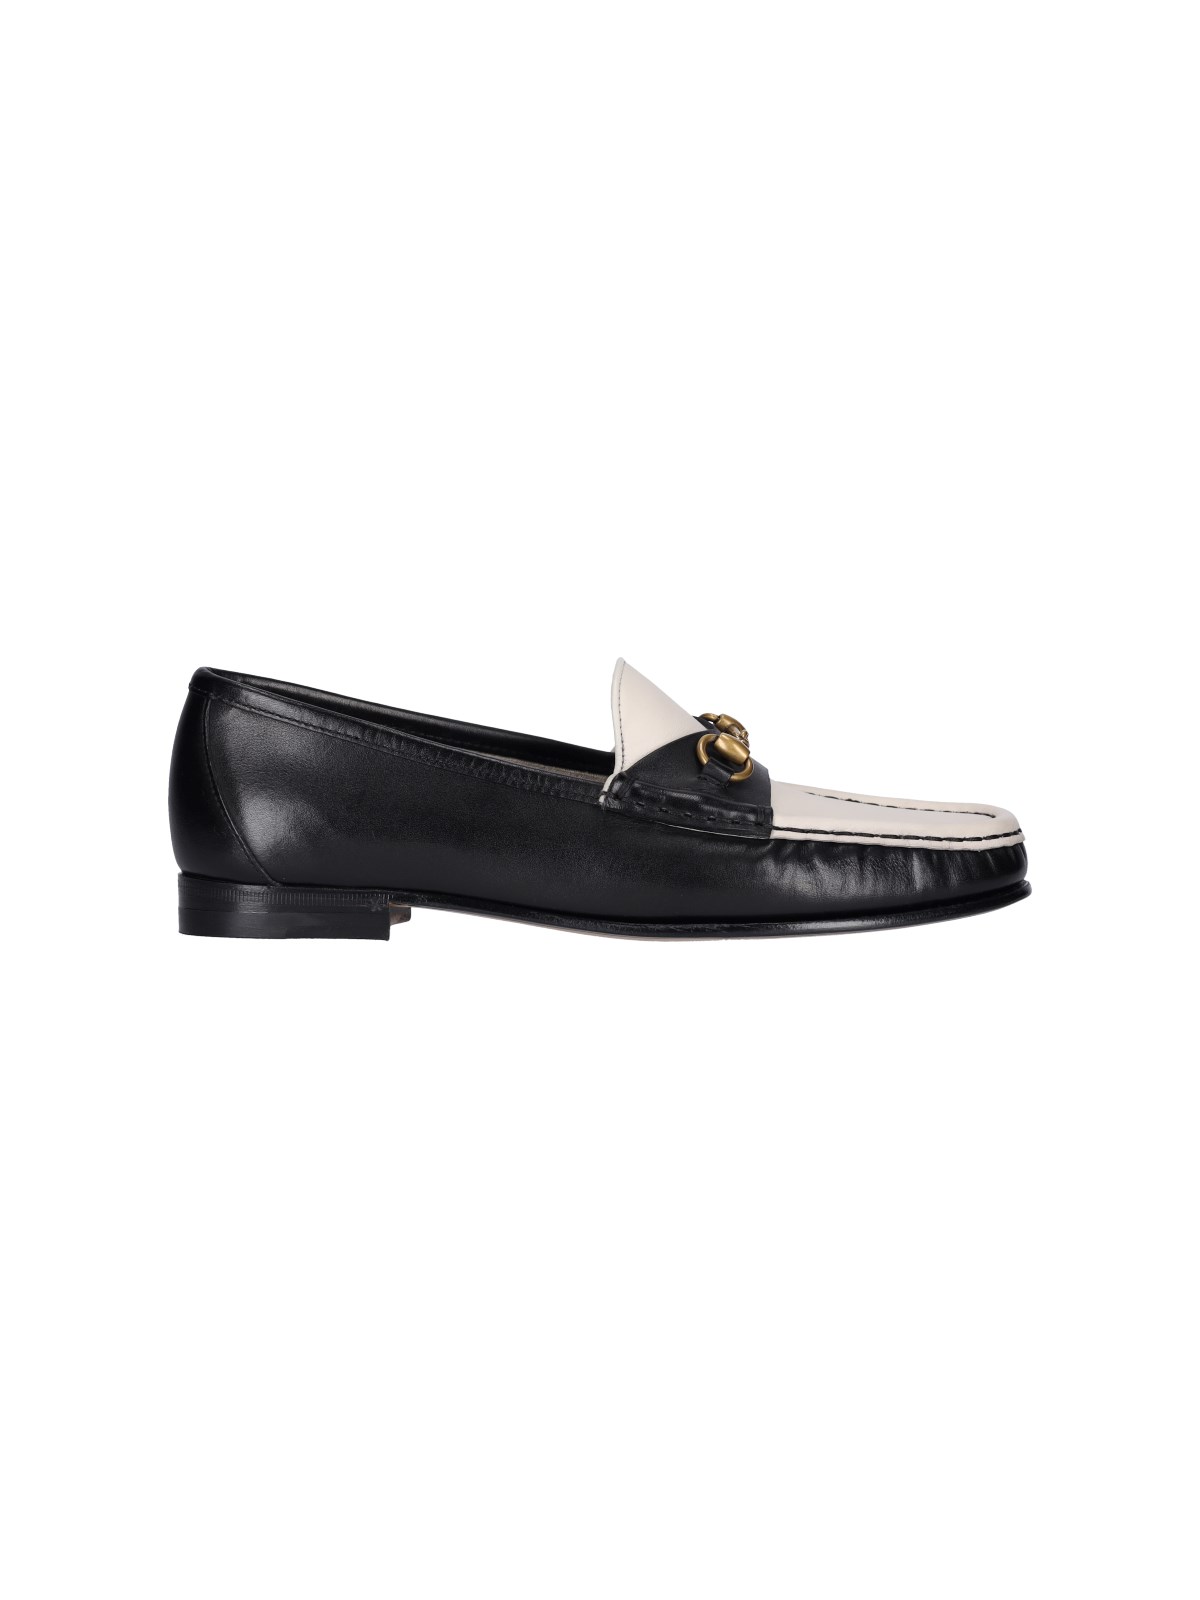 Gucci - Horsebit 1953 Leather Loafers - Womens - Black